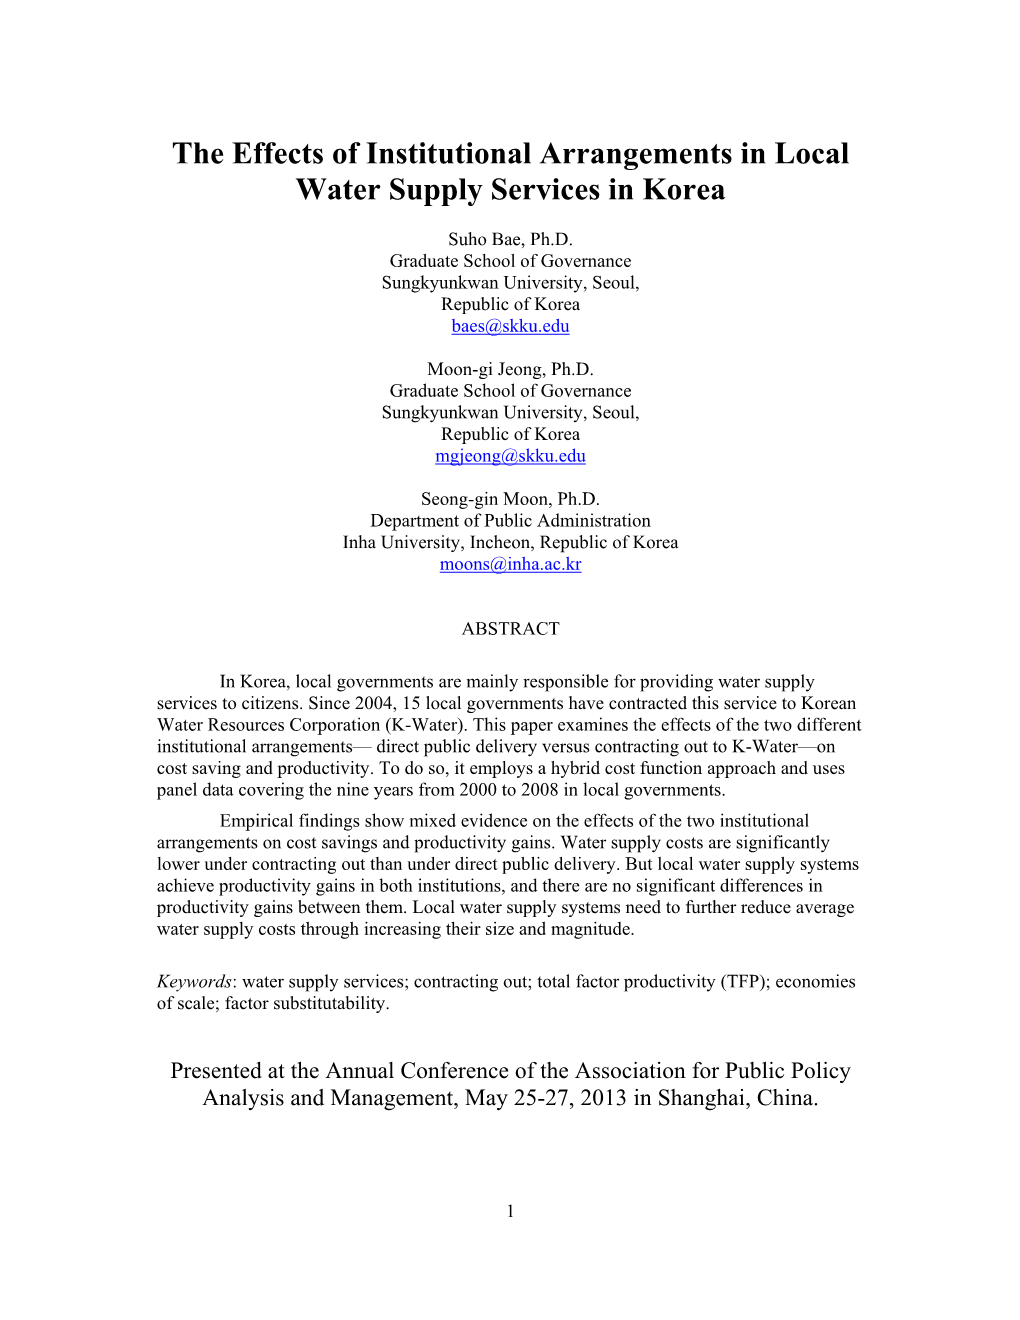 The Effects of Institutional Arrangements in Local Water Supply Services in Korea